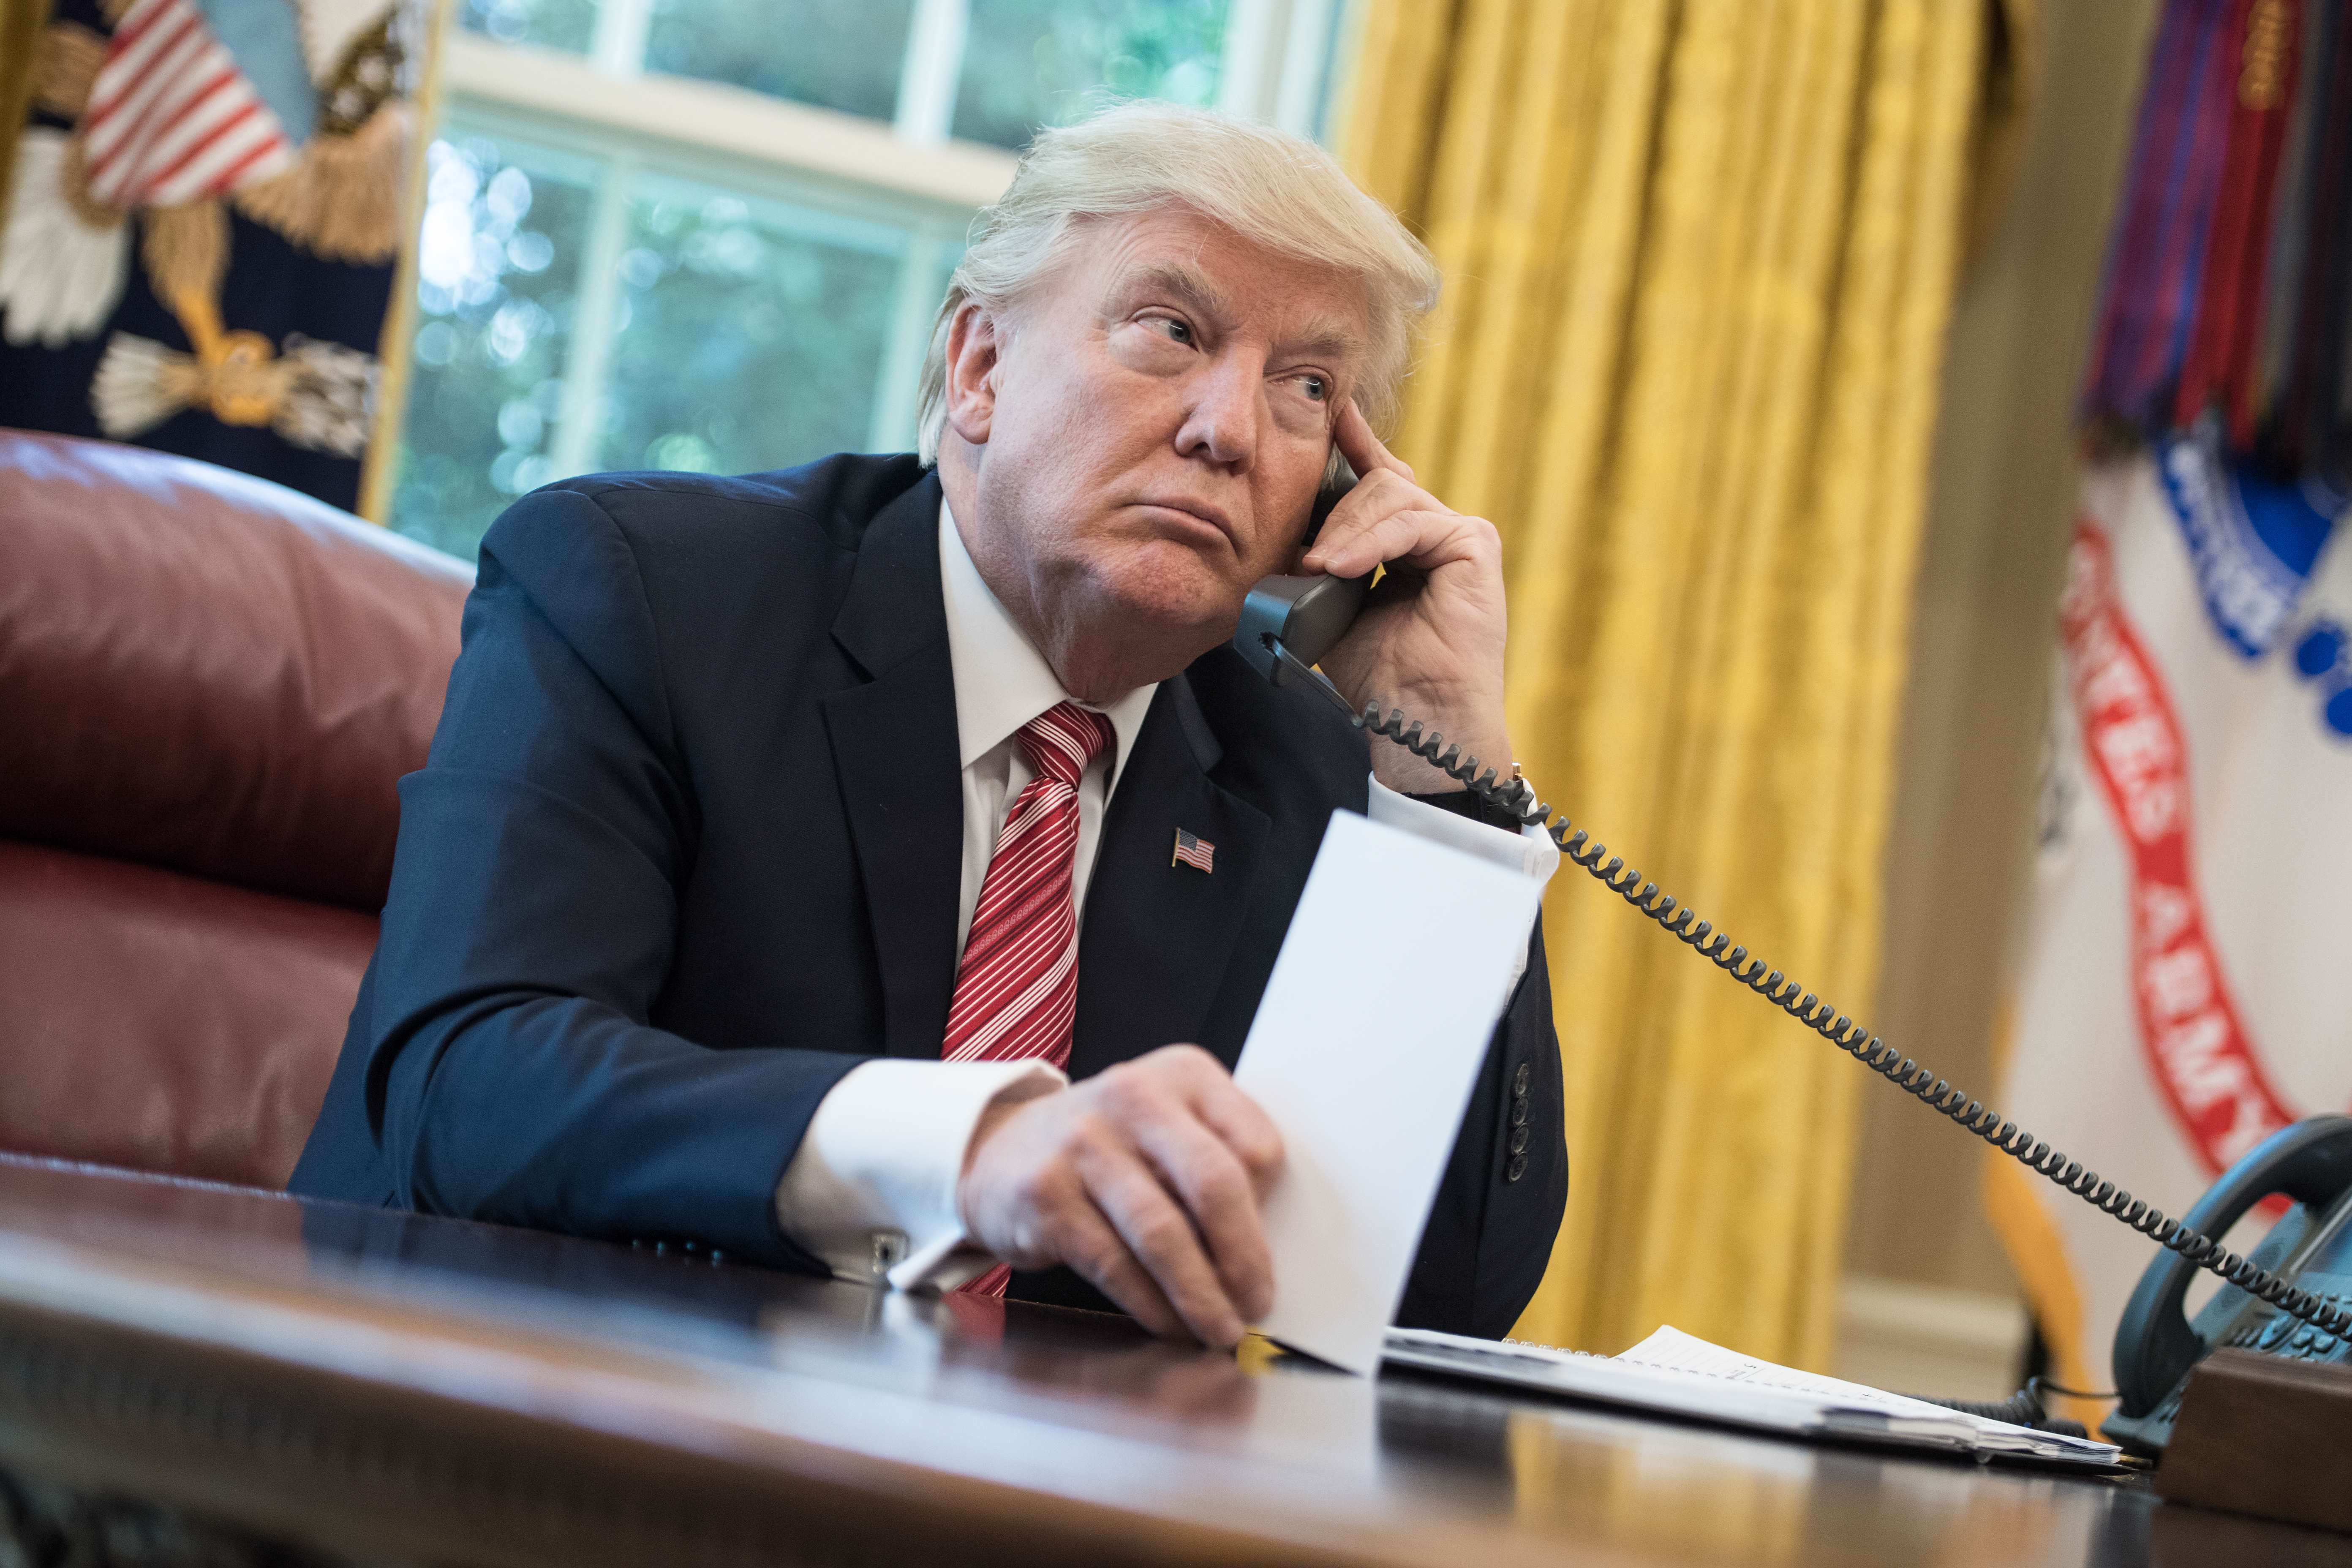 President Trump speaks on the phone in the Oval Office